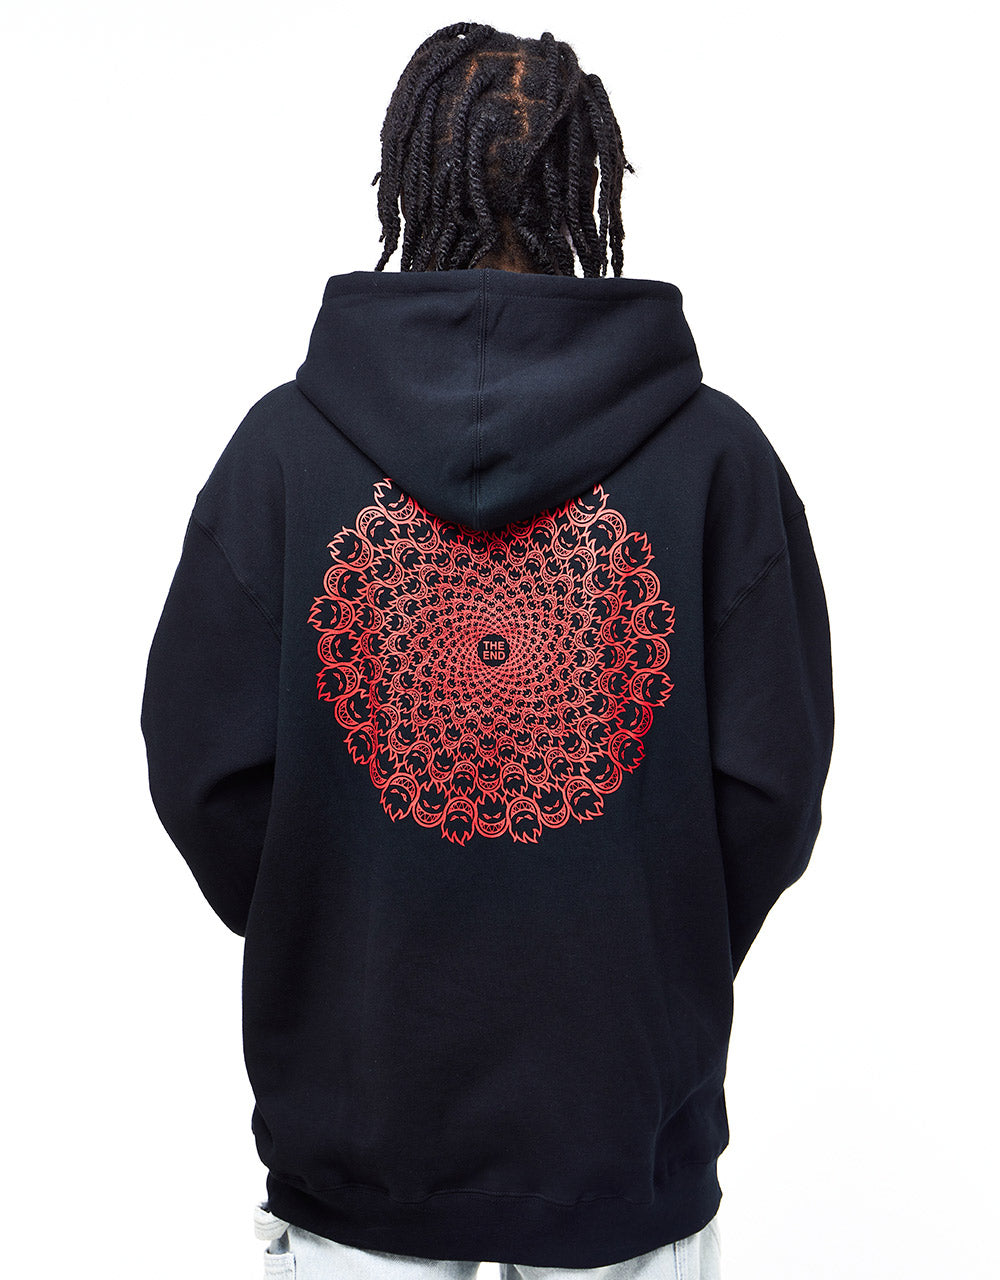 Spitfire Eternal Repeater Pullover Hoodie - Black/Red